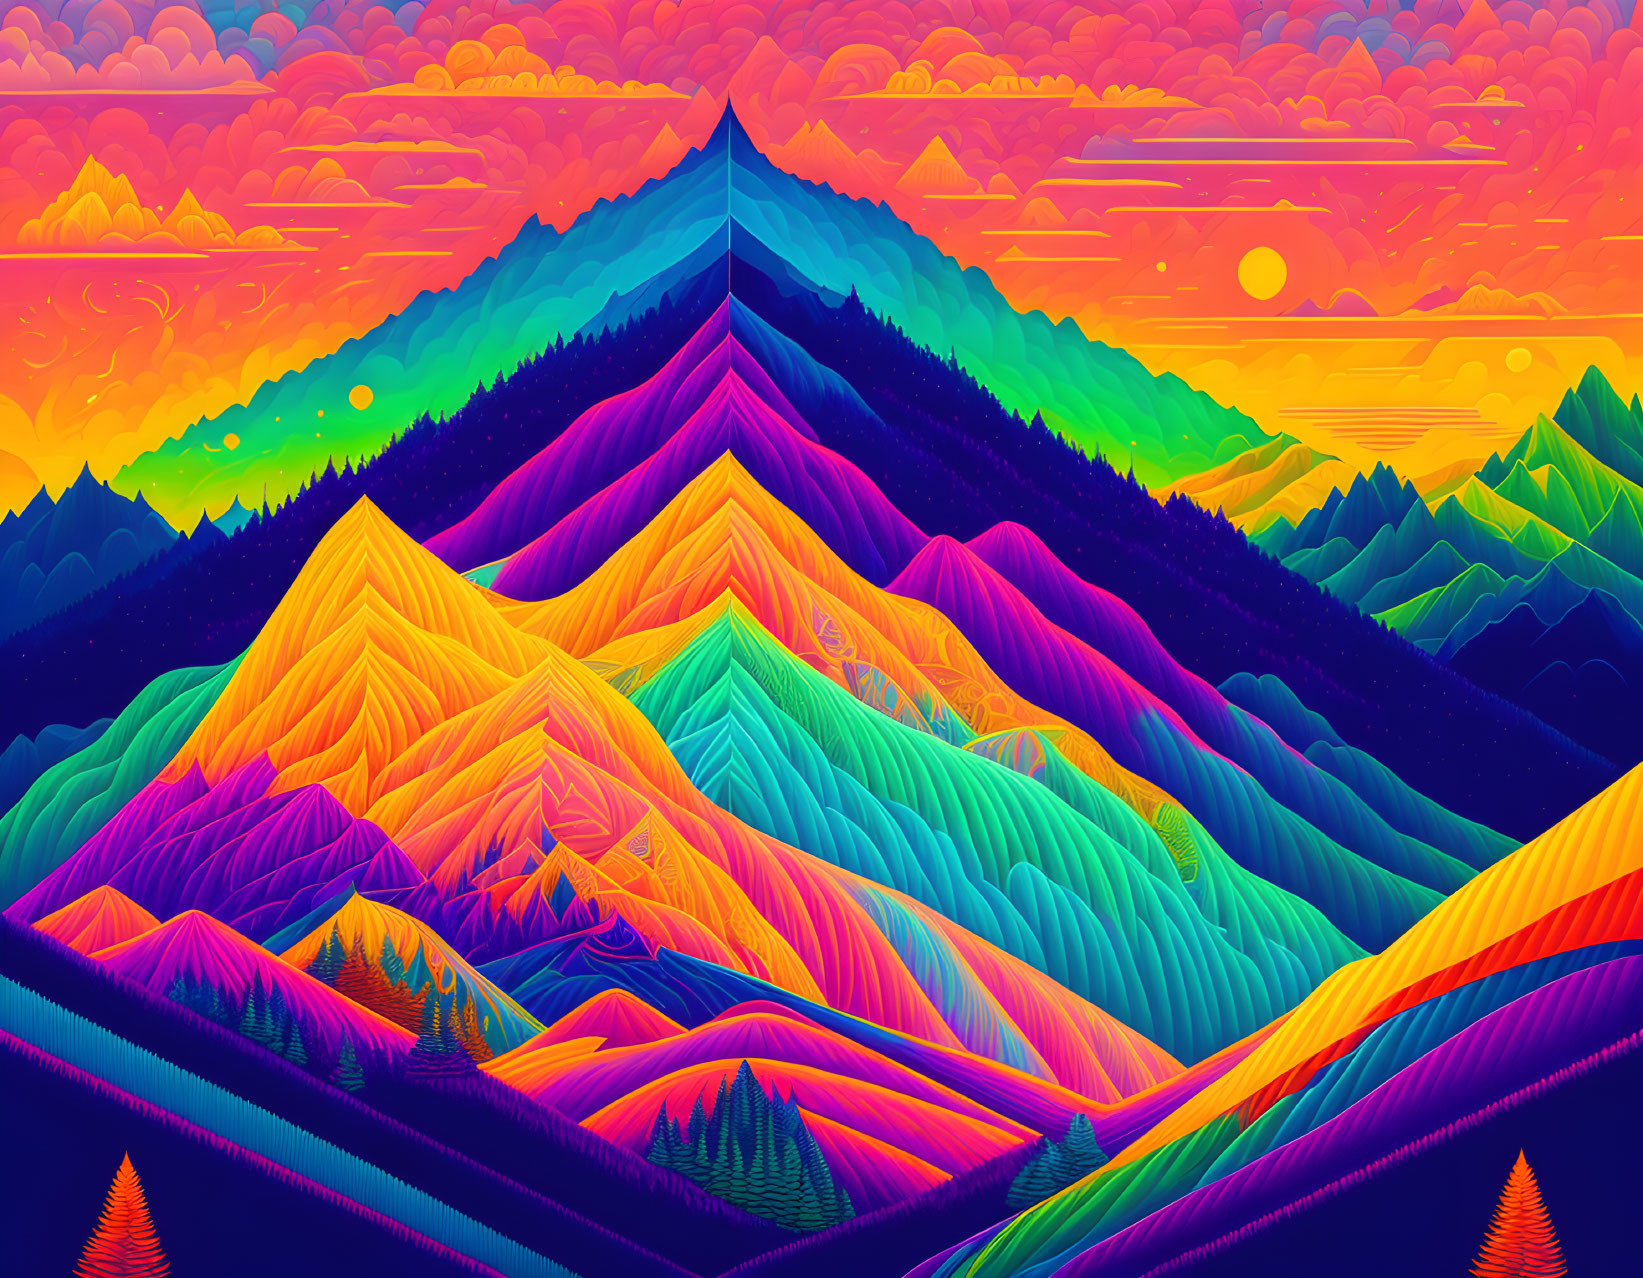 Colorful Psychedelic Mountain Landscape at Sunset